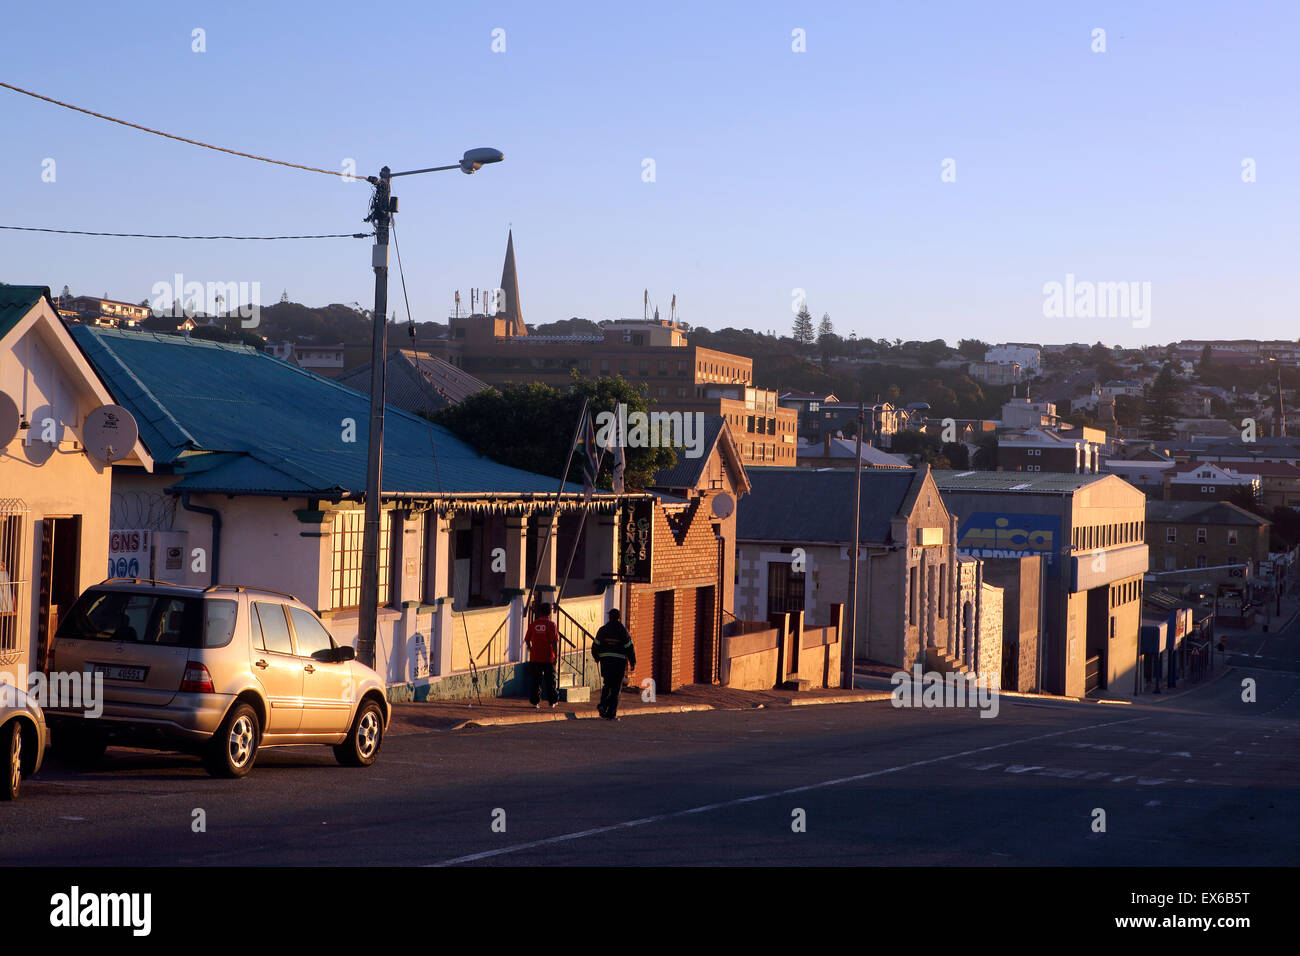 Late afternoon in Mossel Bay, South Africa Stock Photo